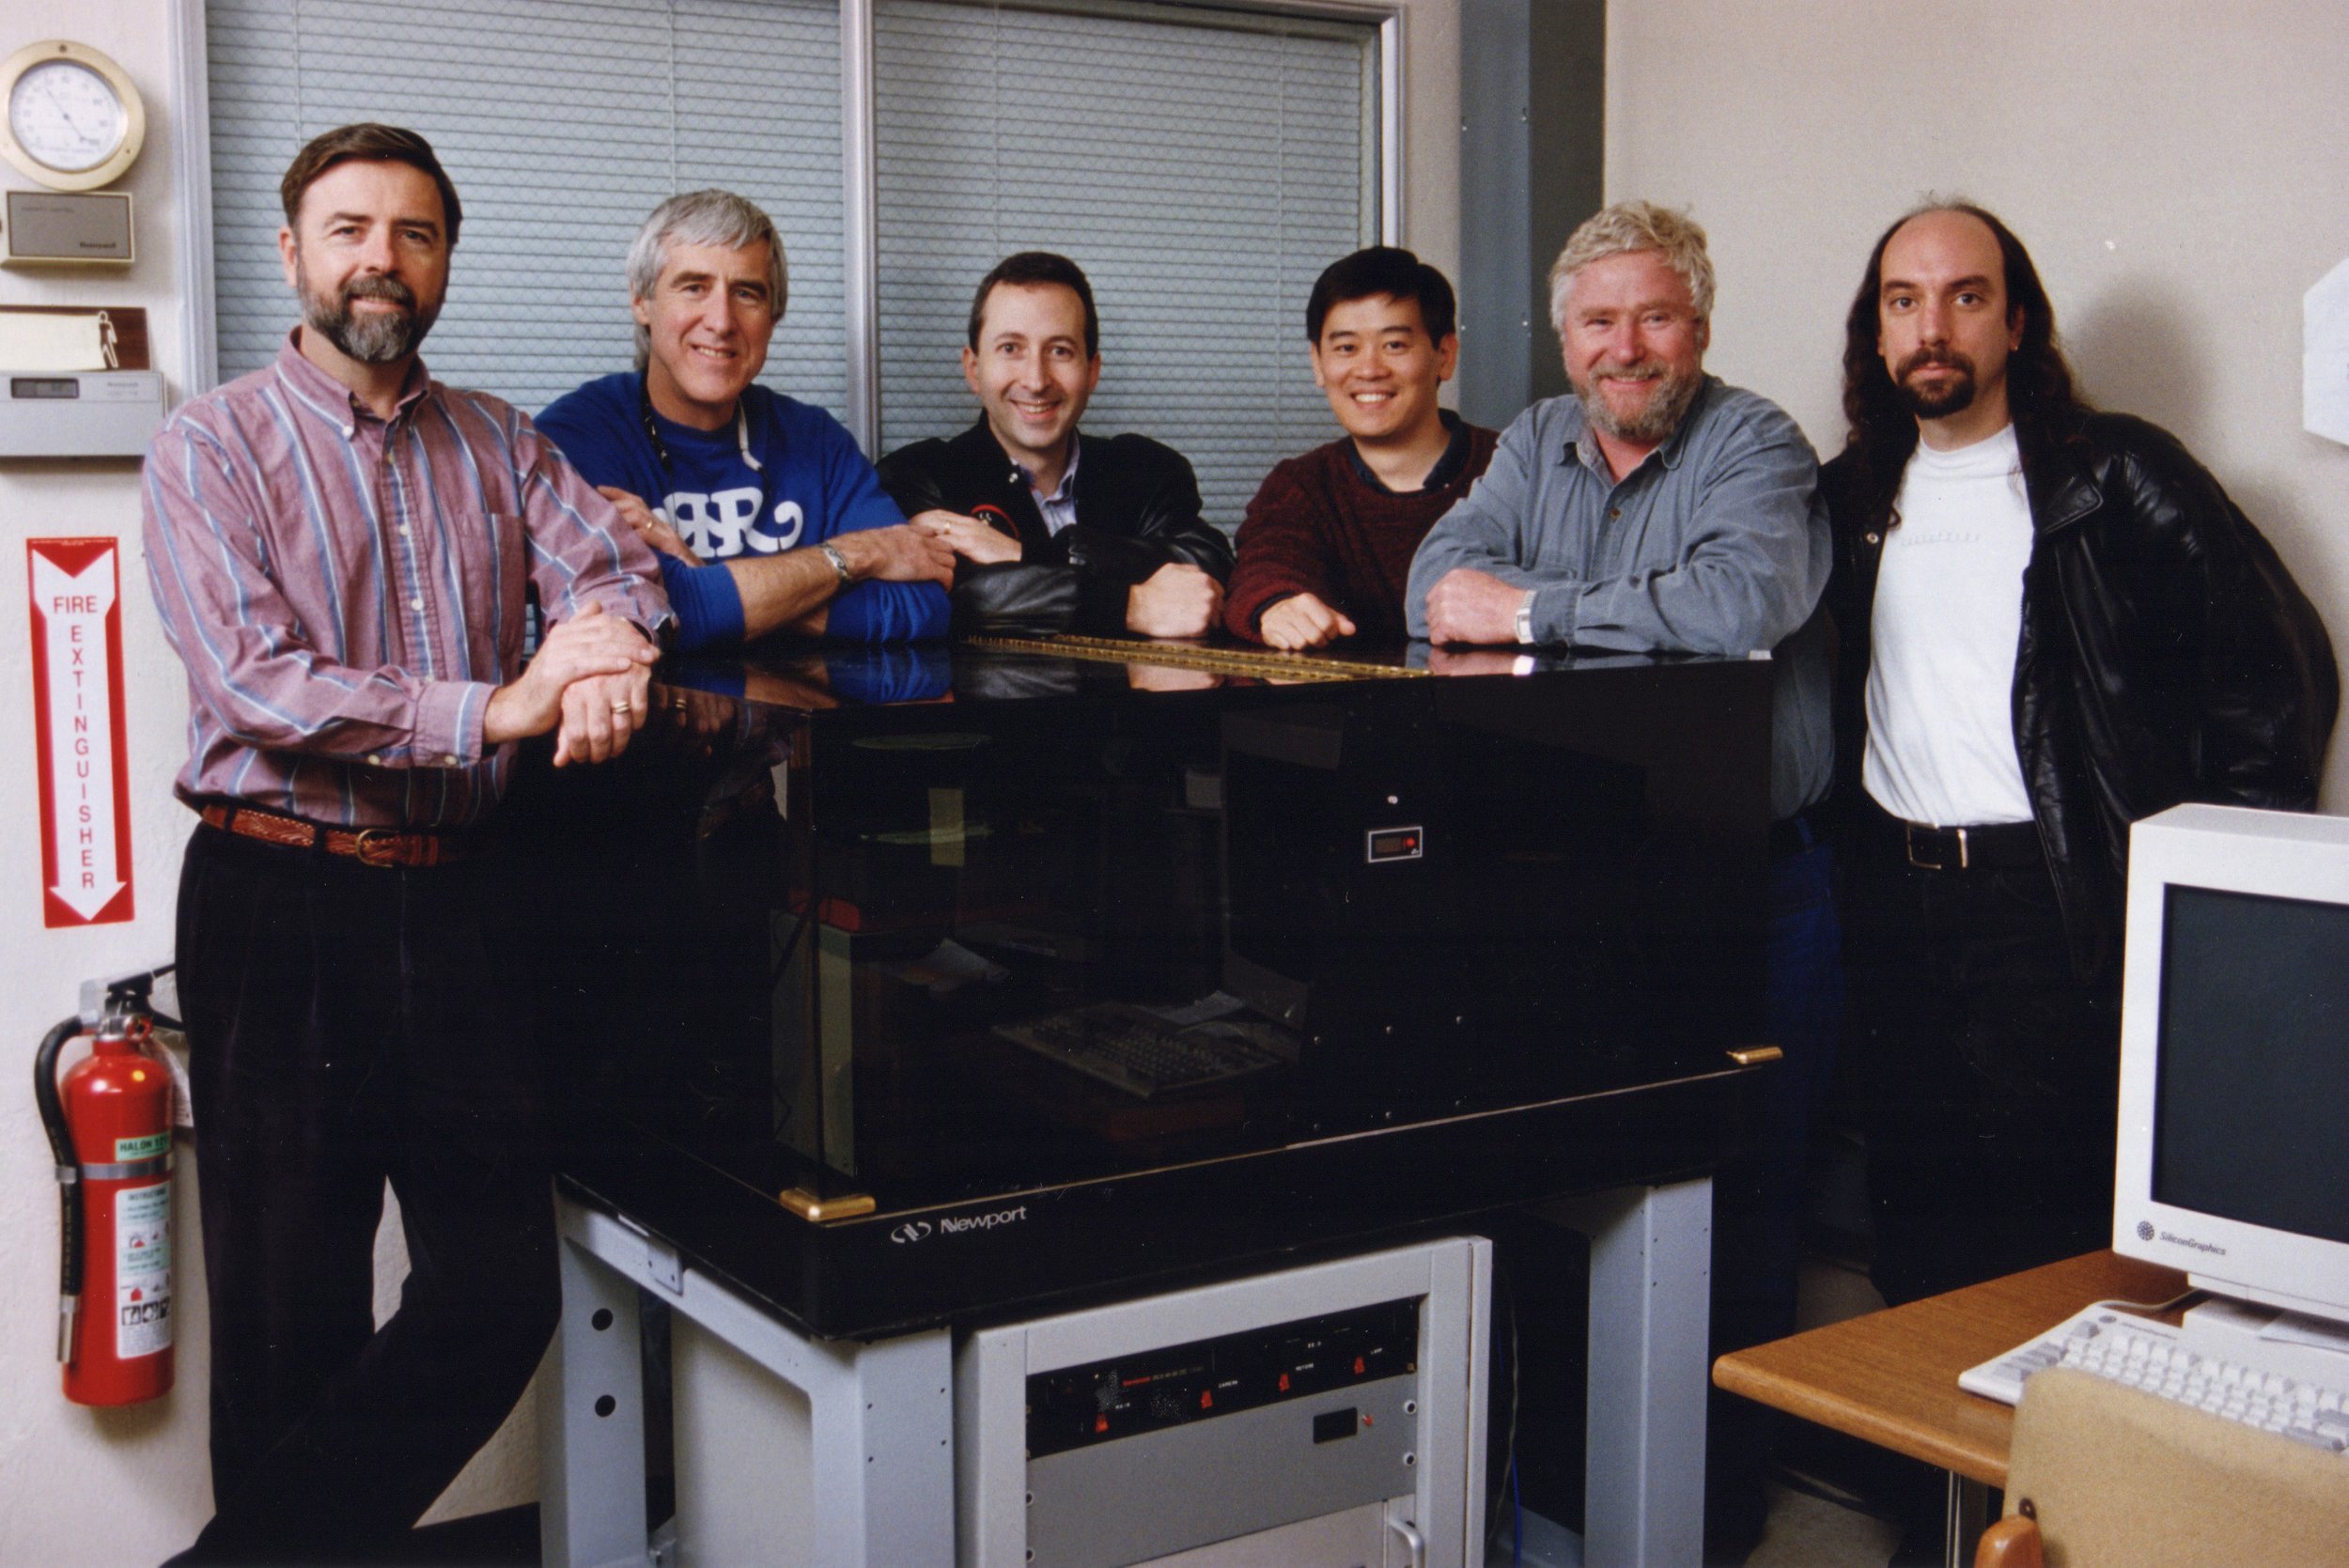  Mike Bowles, Mike MacKenzie, Jeff Light, Lincoln Hu, Udo Pampel, and Josh Pines with the film scanner they built.  